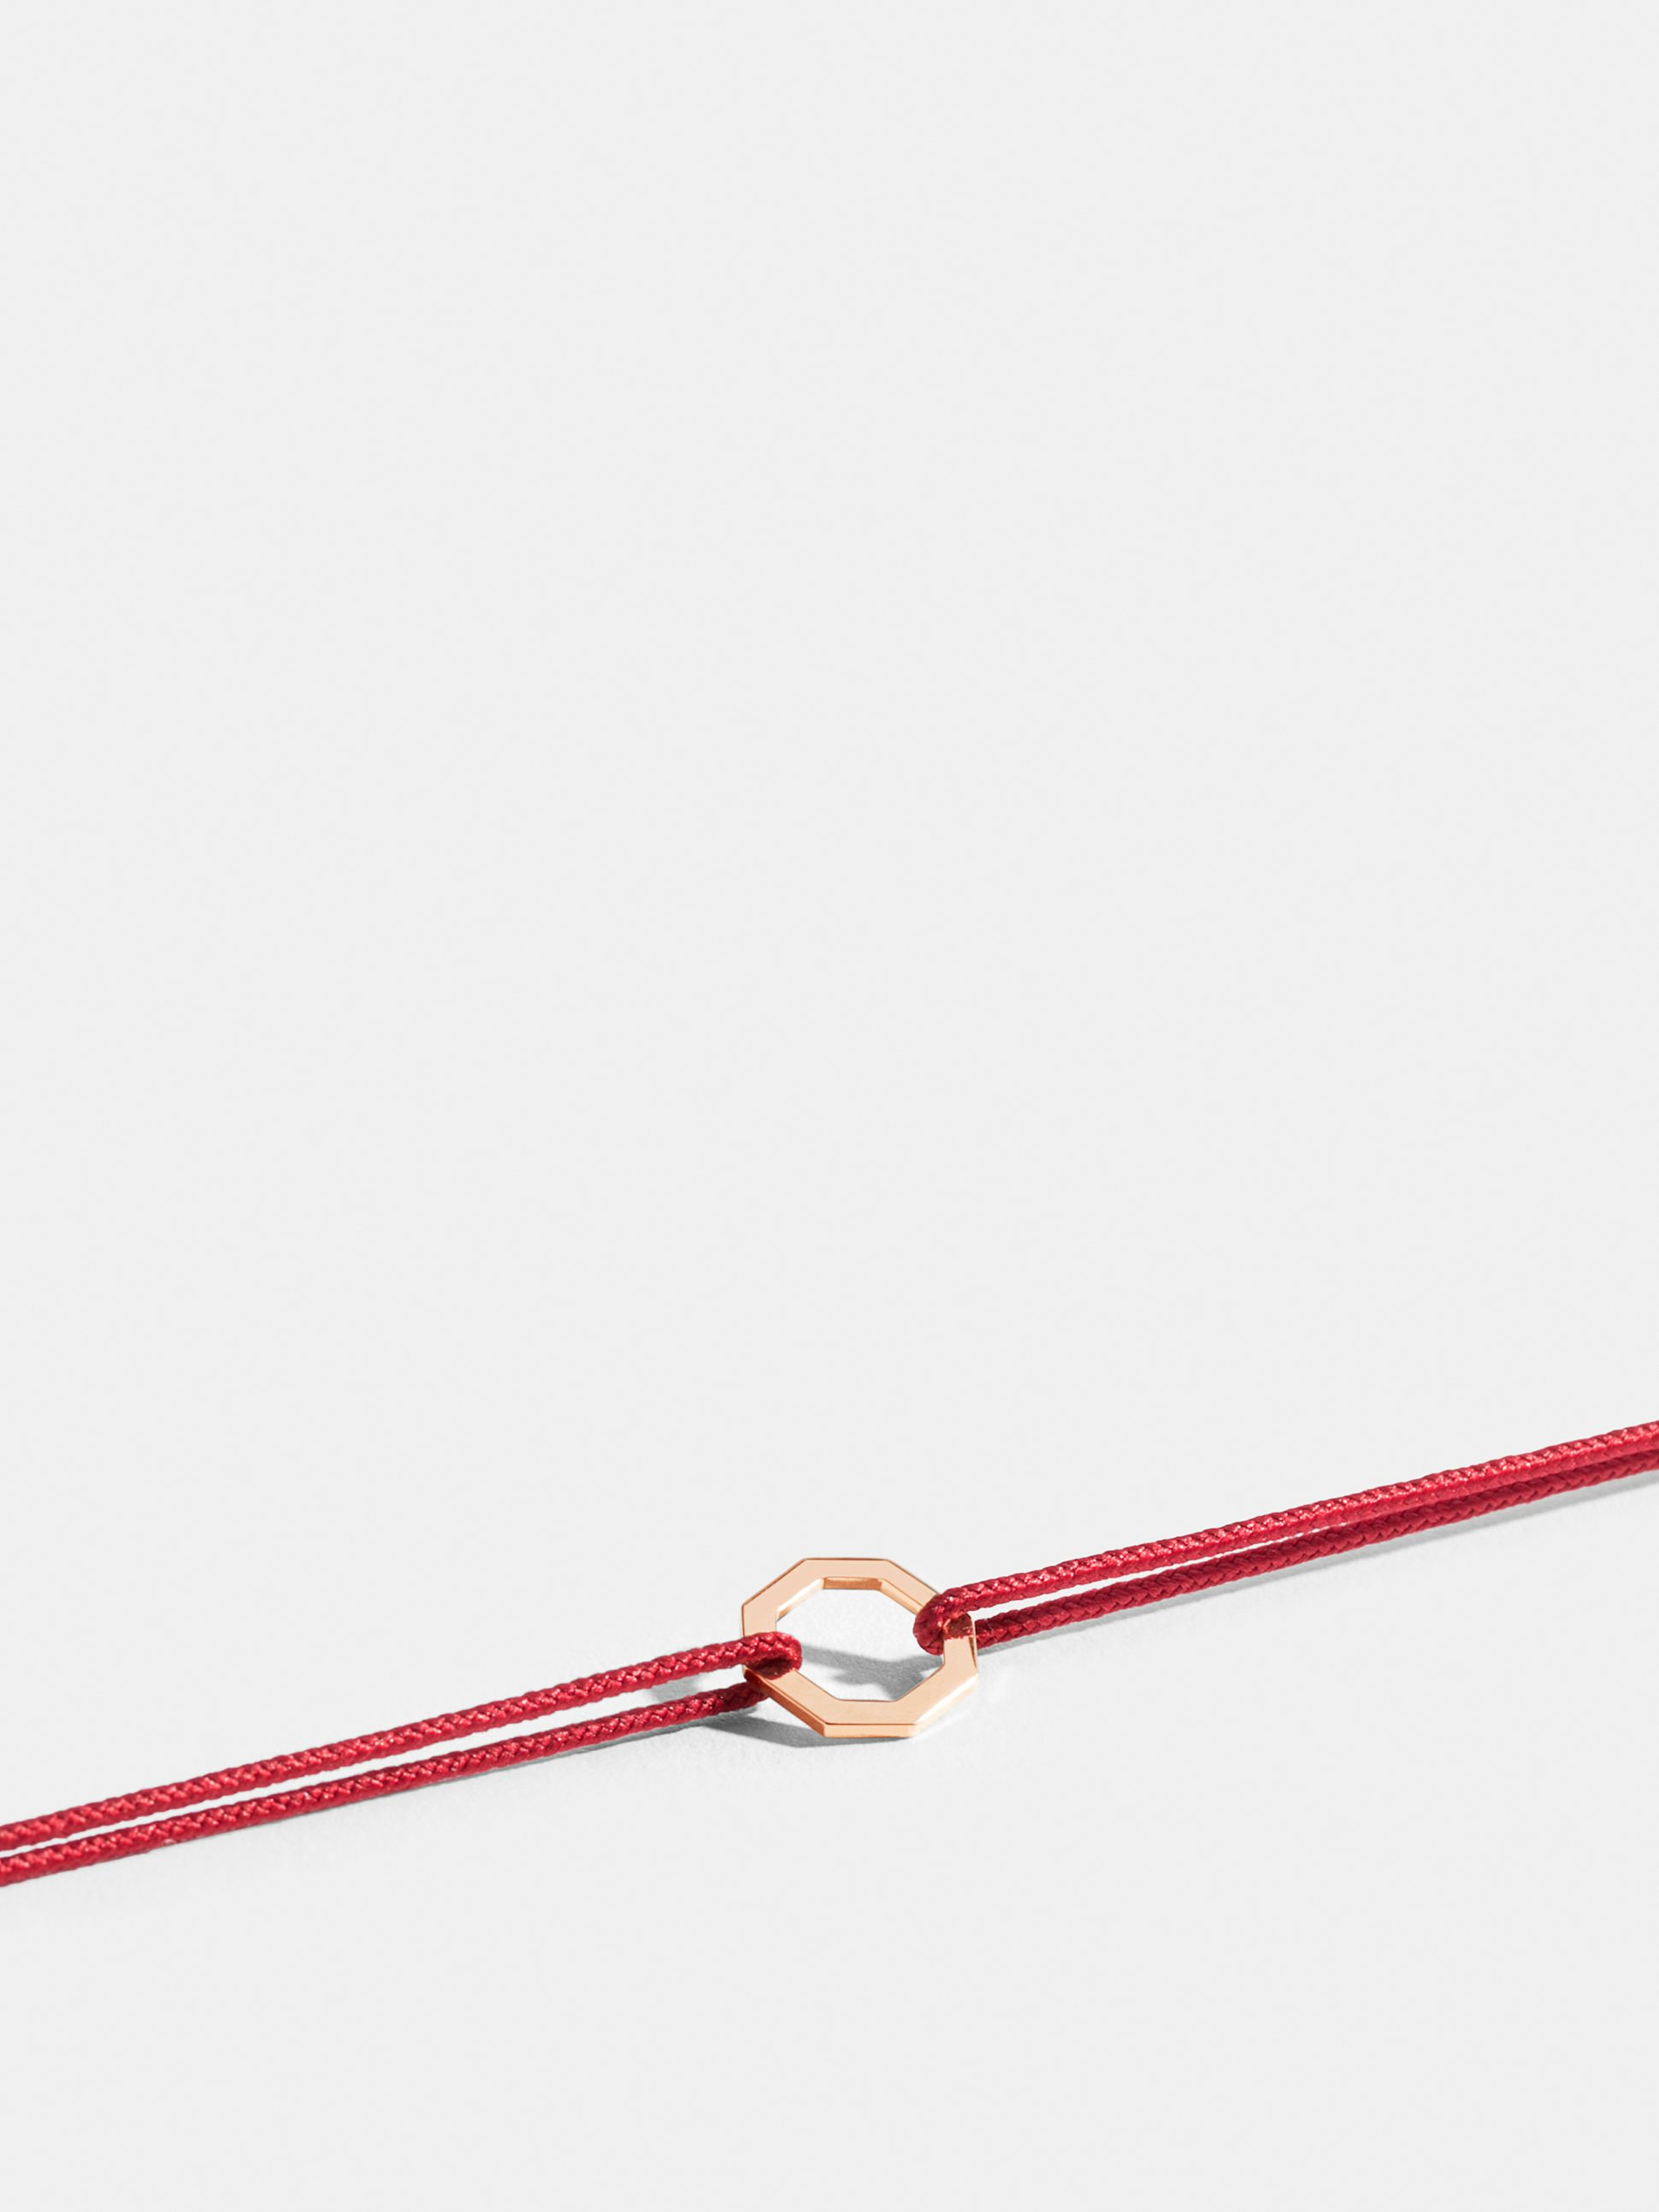 Octogone motif in 18k Fairmined ethical rose gold, on a cord. 